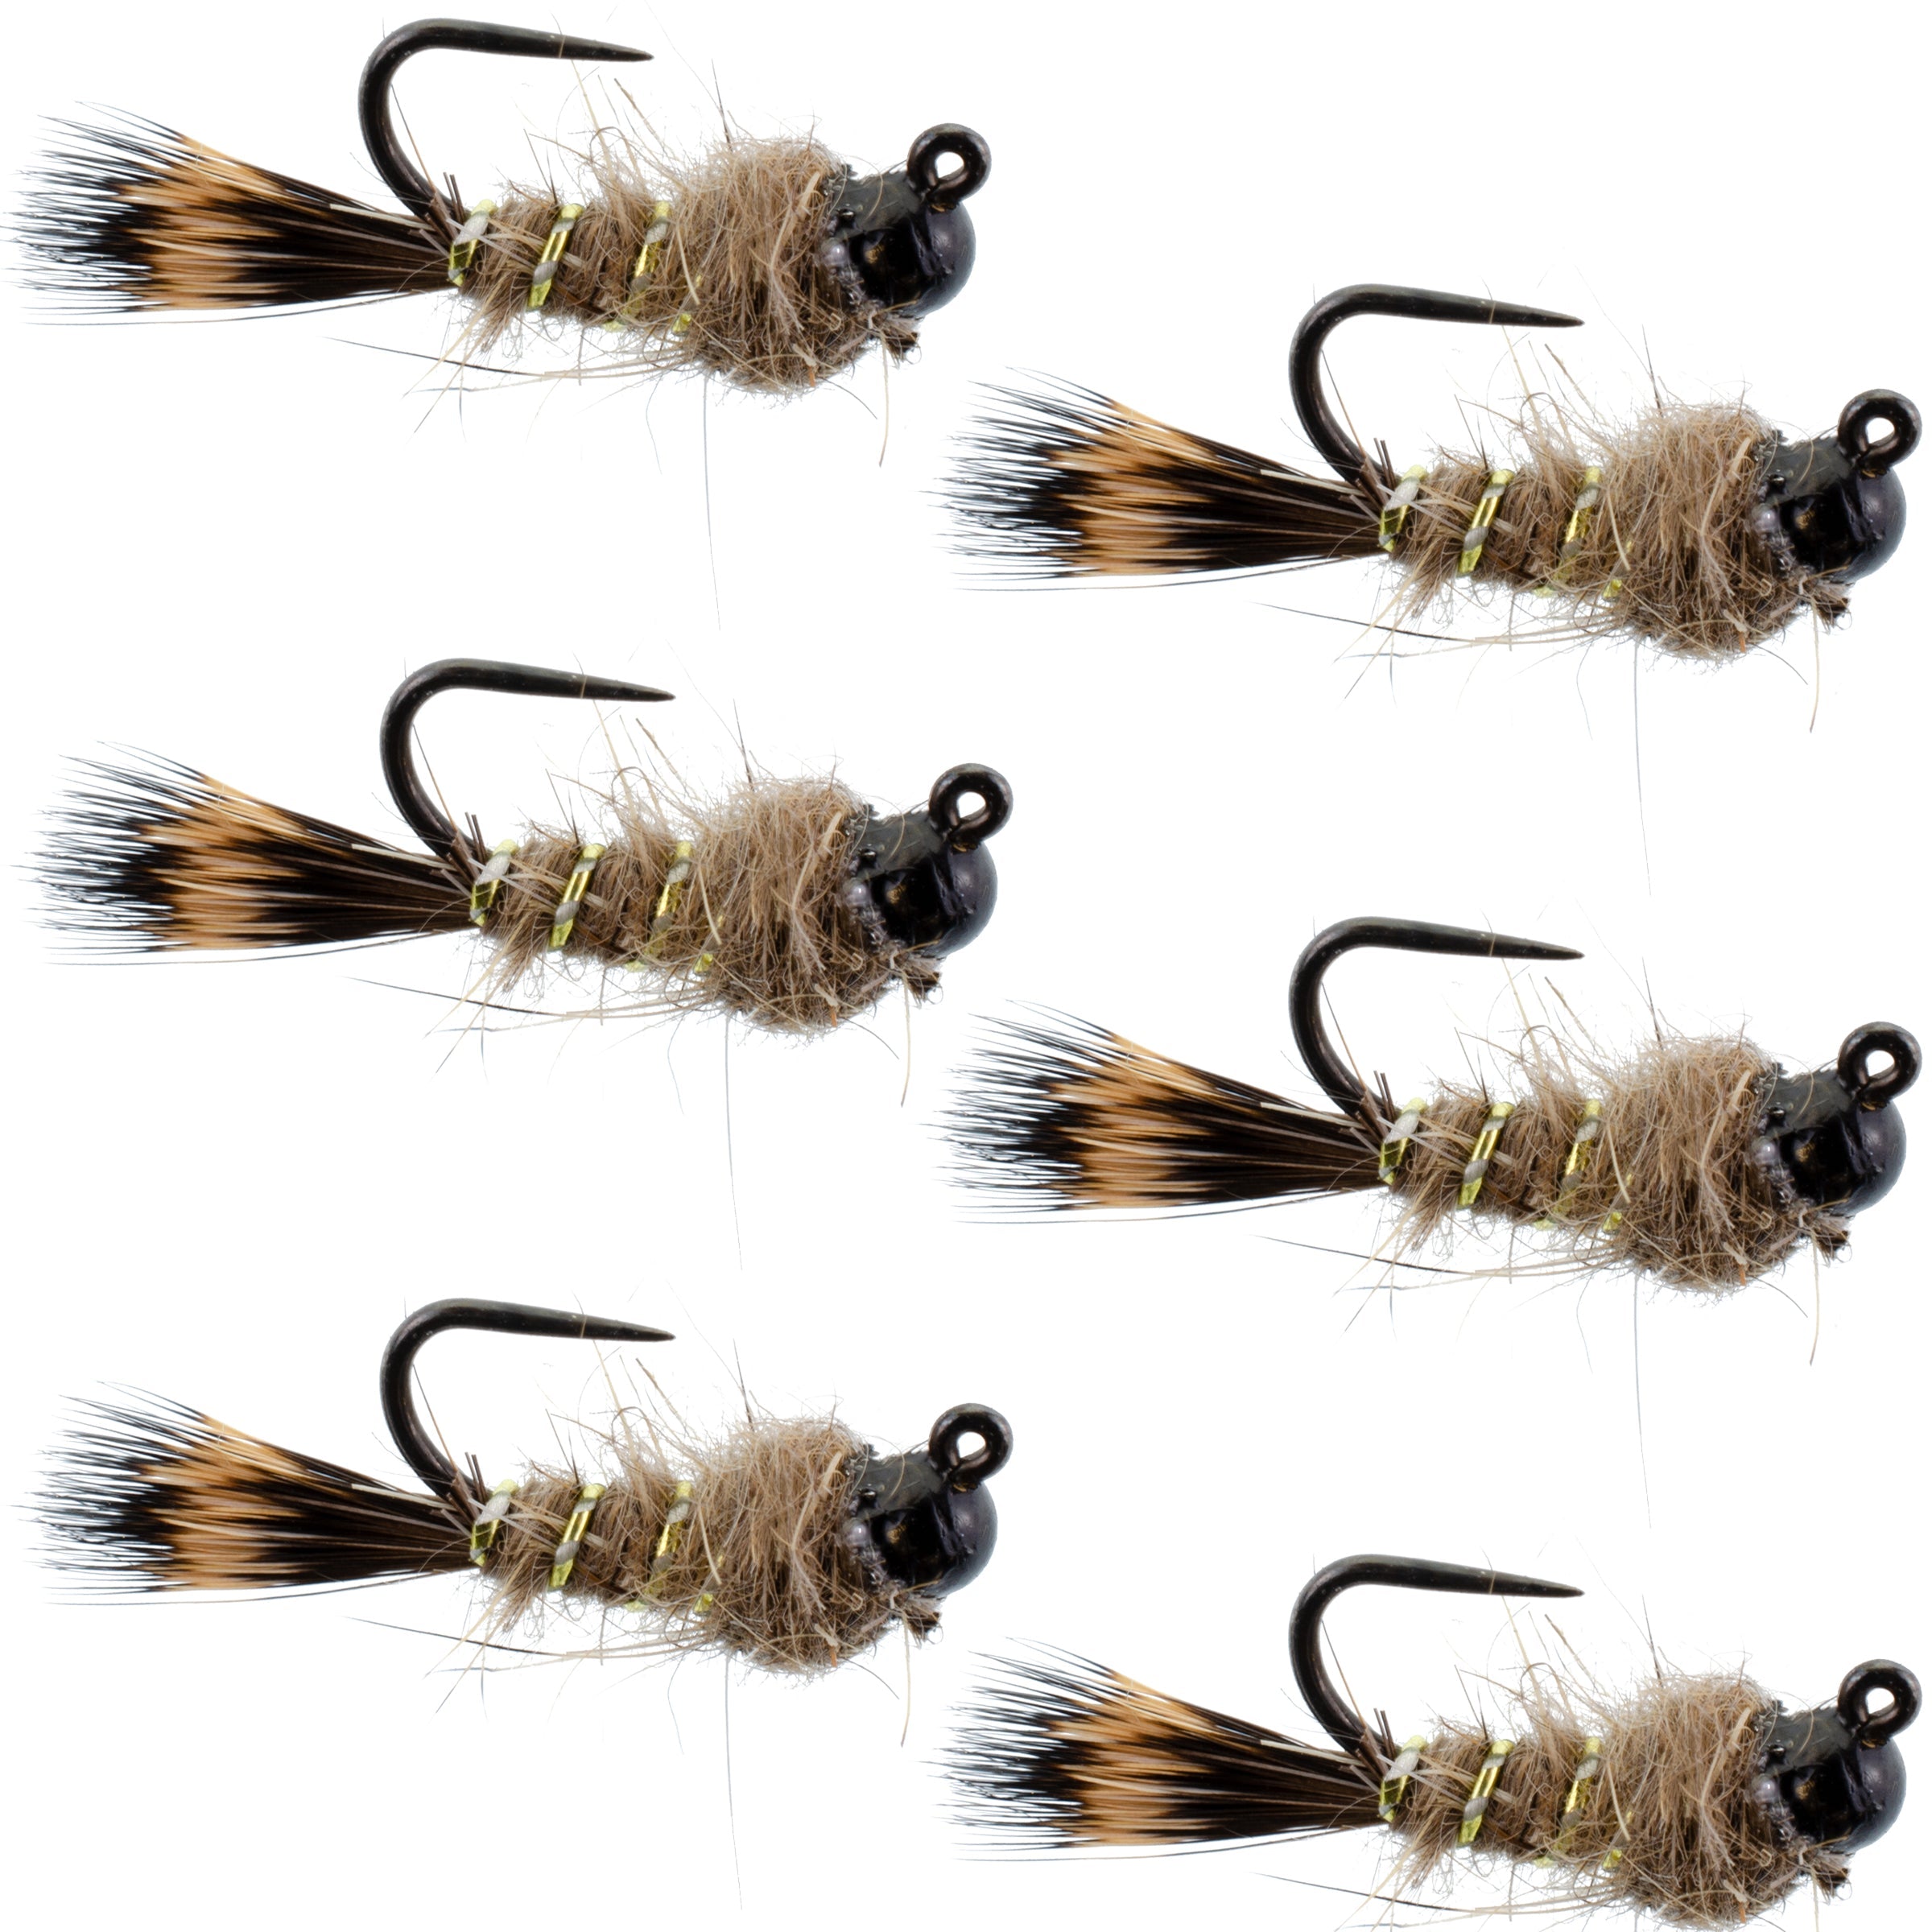 Black Tungsten Bead Tactical Hares Ear Czech Nymph Euro Nymphing Fly - 6 Flies Size 12